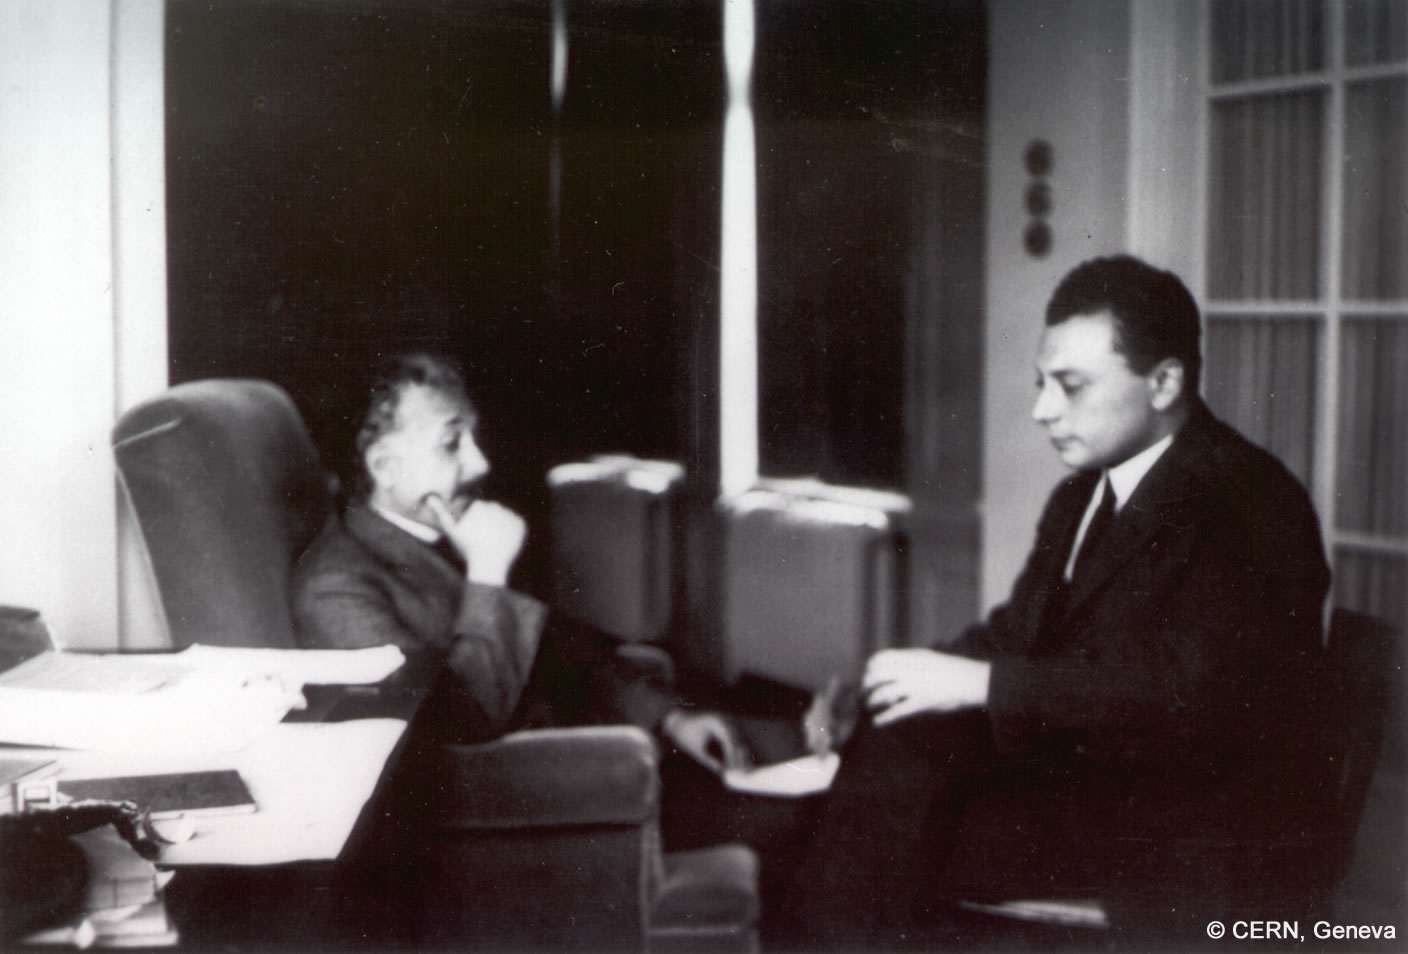 Wolfgang Pauli and Albert Einstein sit vs. each other and seem thoughtful